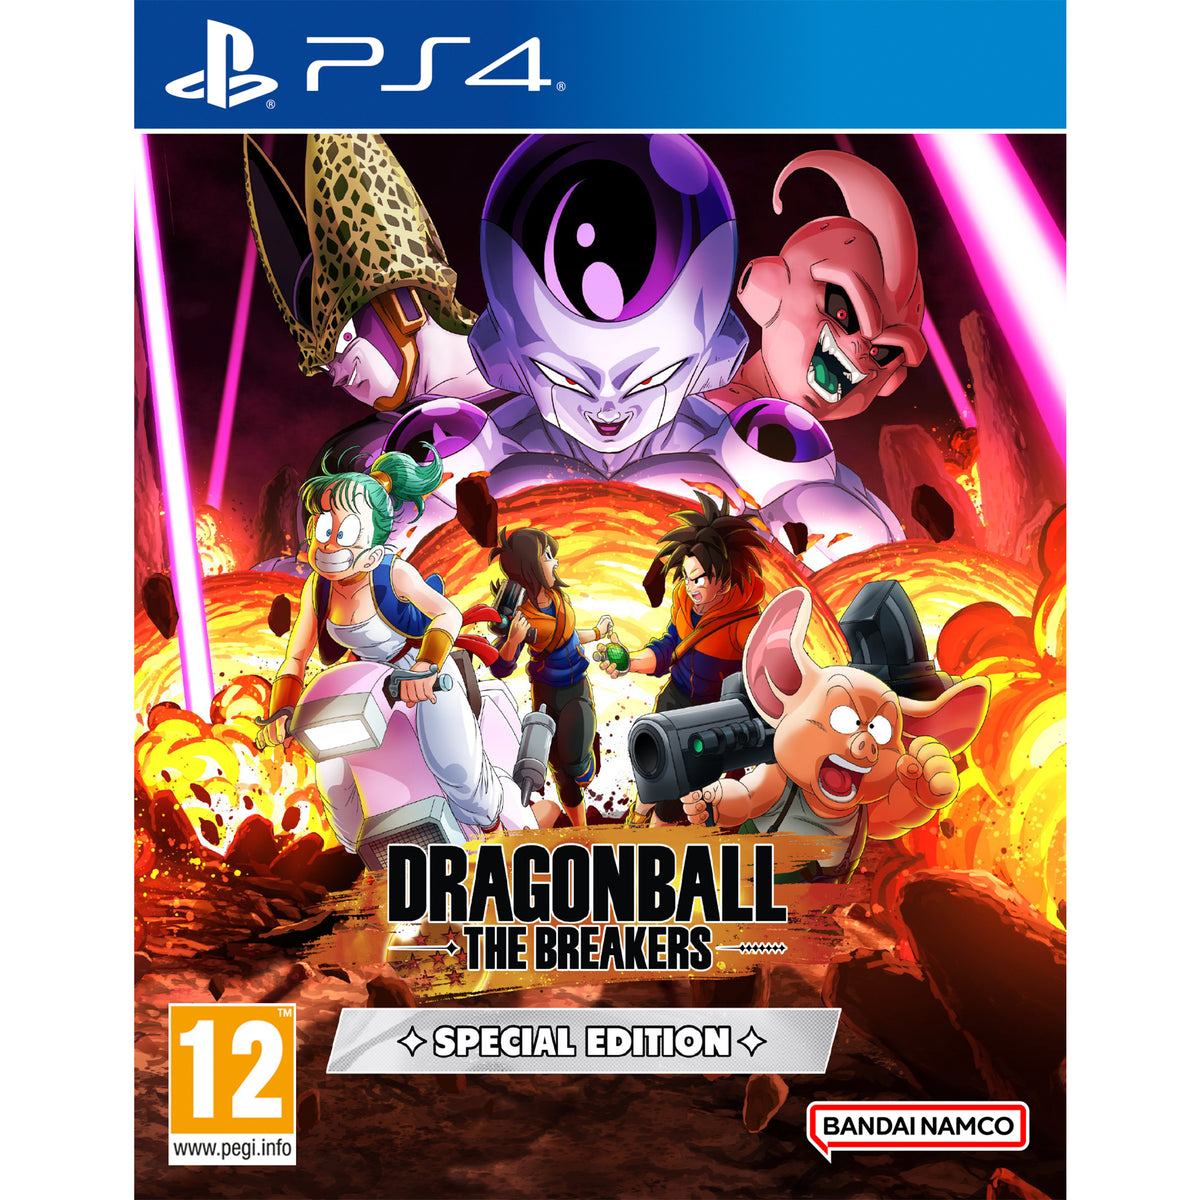 Dragon Ball: The Breakers Limited Edition Preorders Now Open